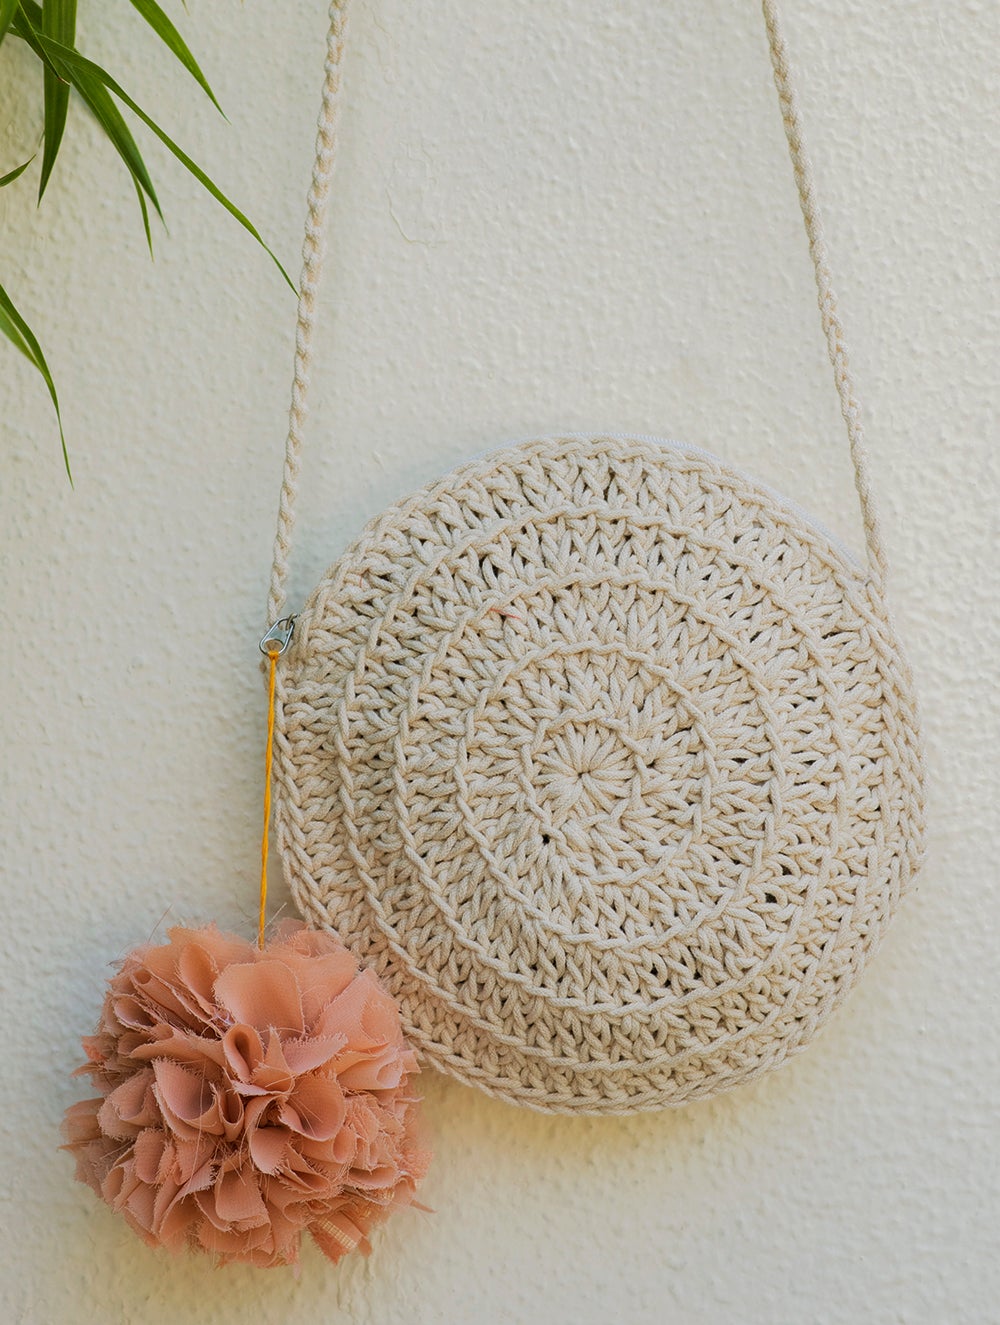 Load image into Gallery viewer, Handknotted Crochet Sling Bag - Round, Ivory